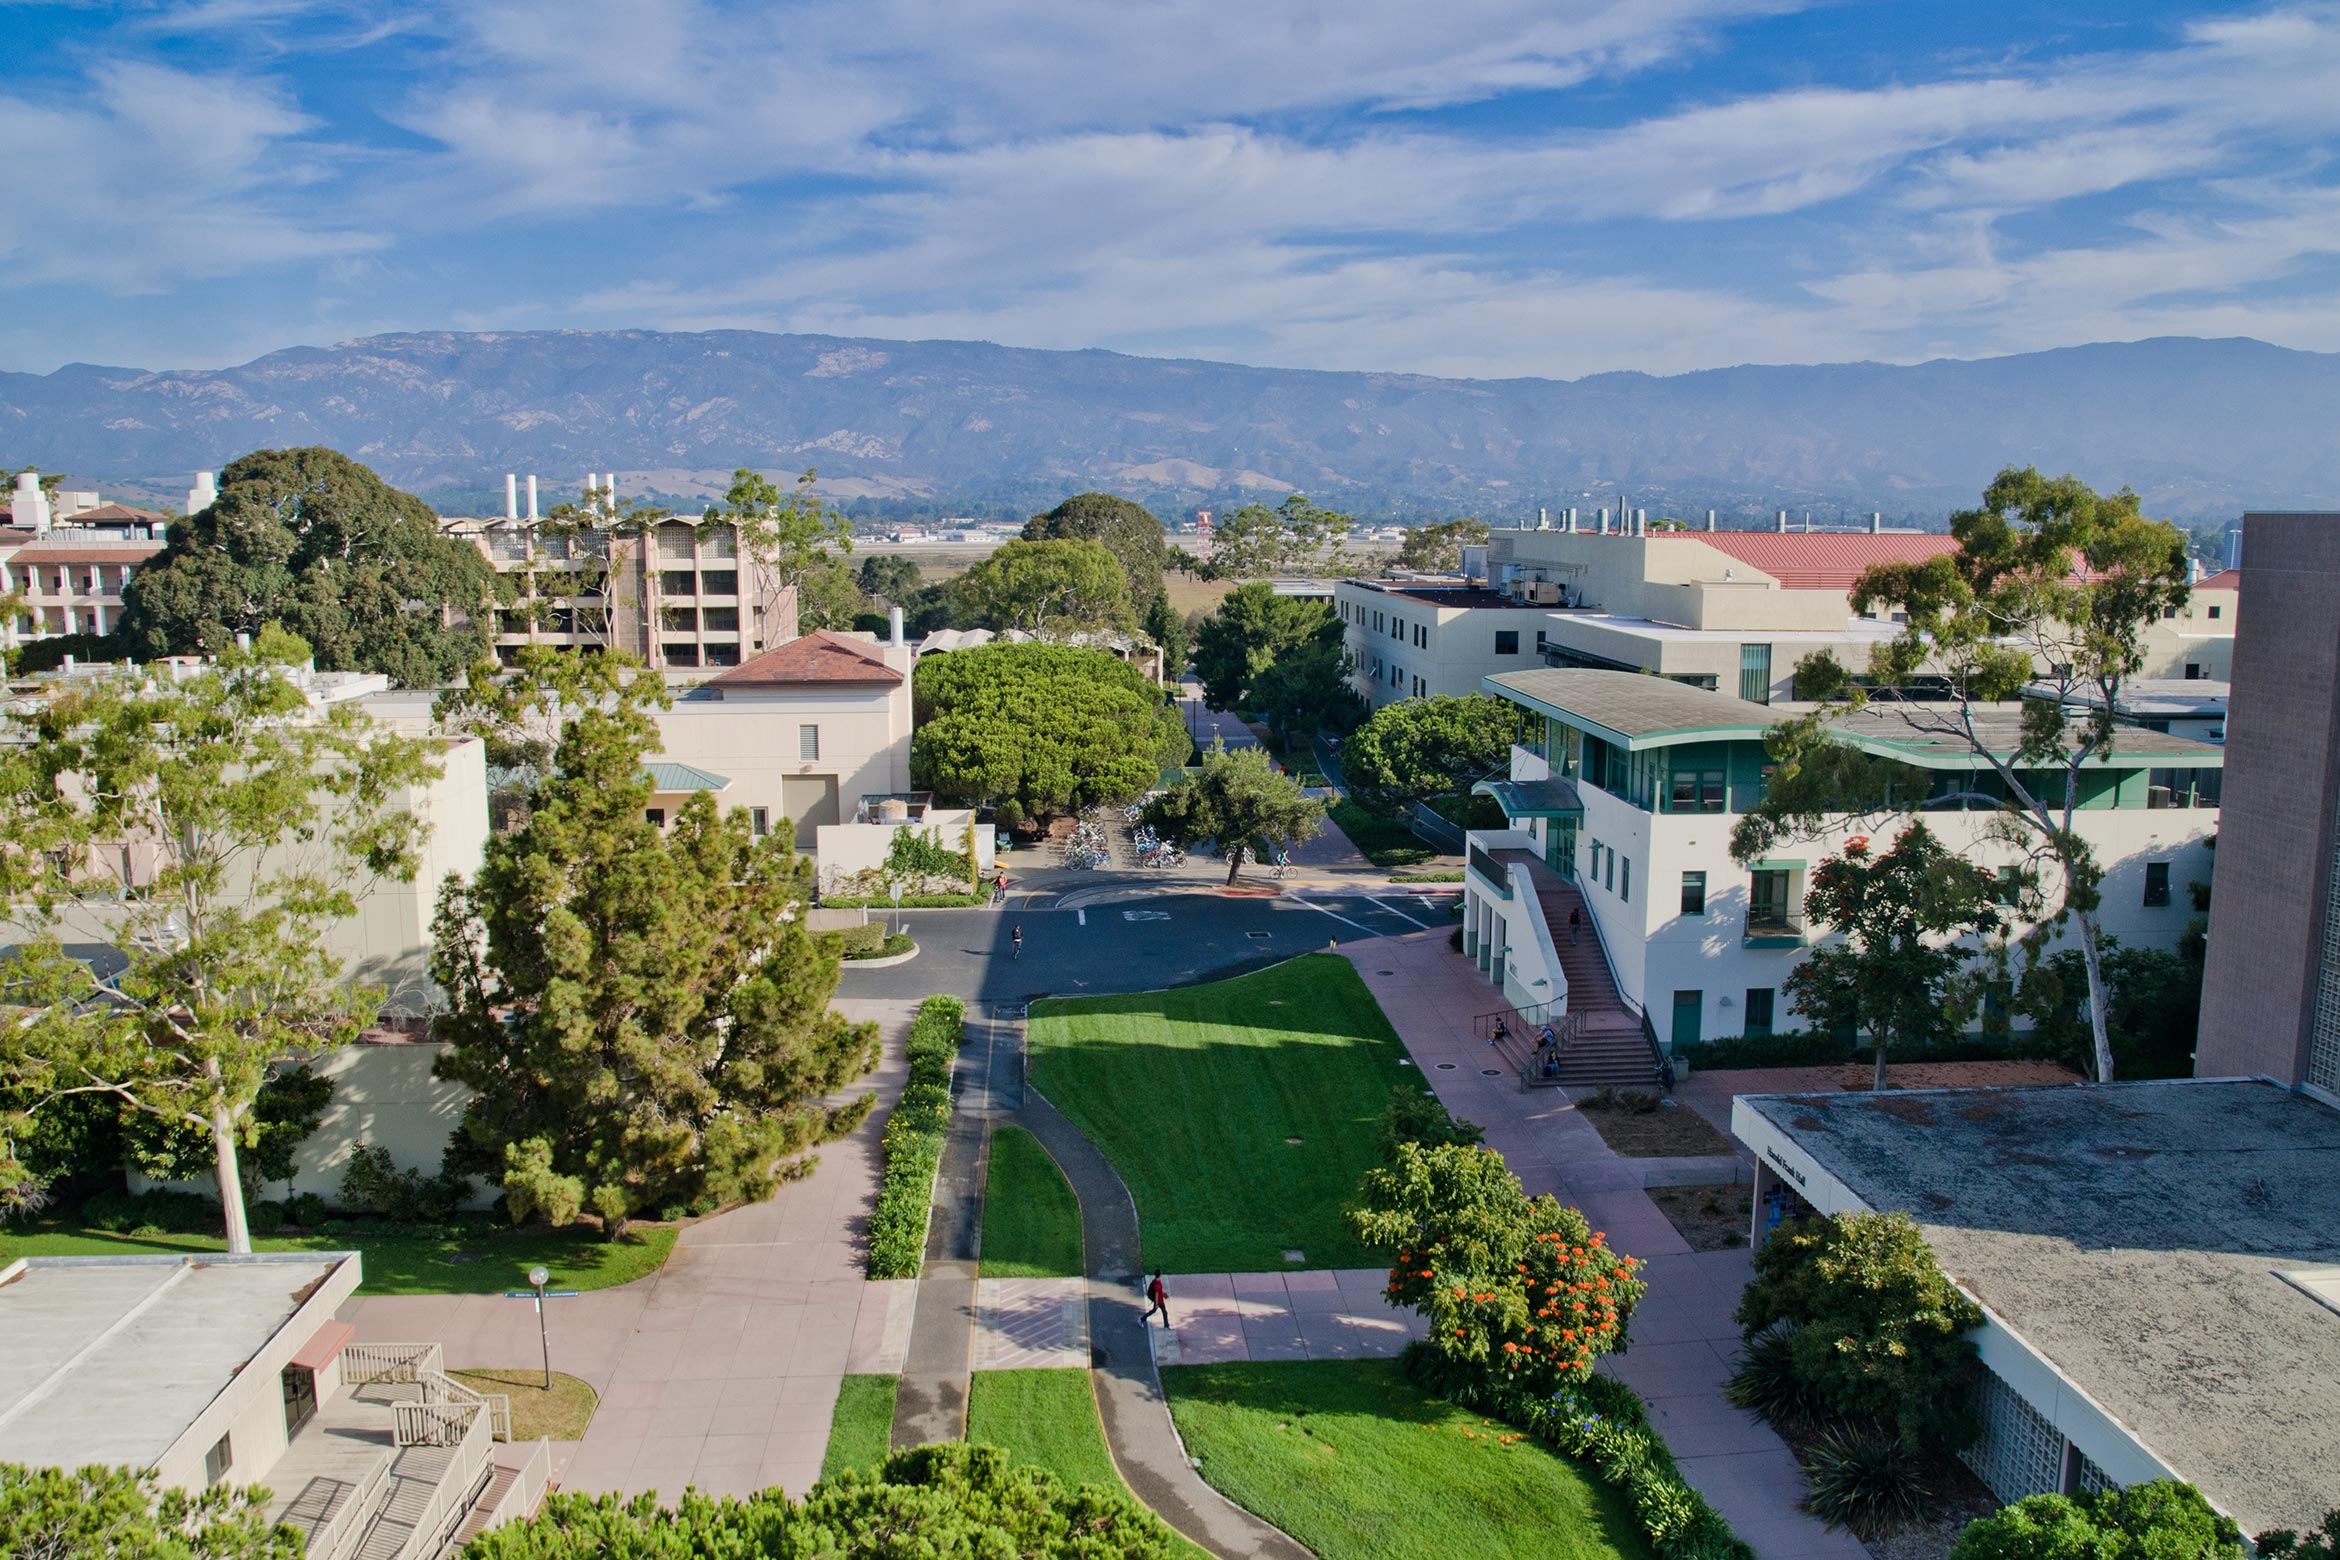 View from a building on the UC Santa Barbara campus encompassing walkways, other buildings and the mountains in the distance